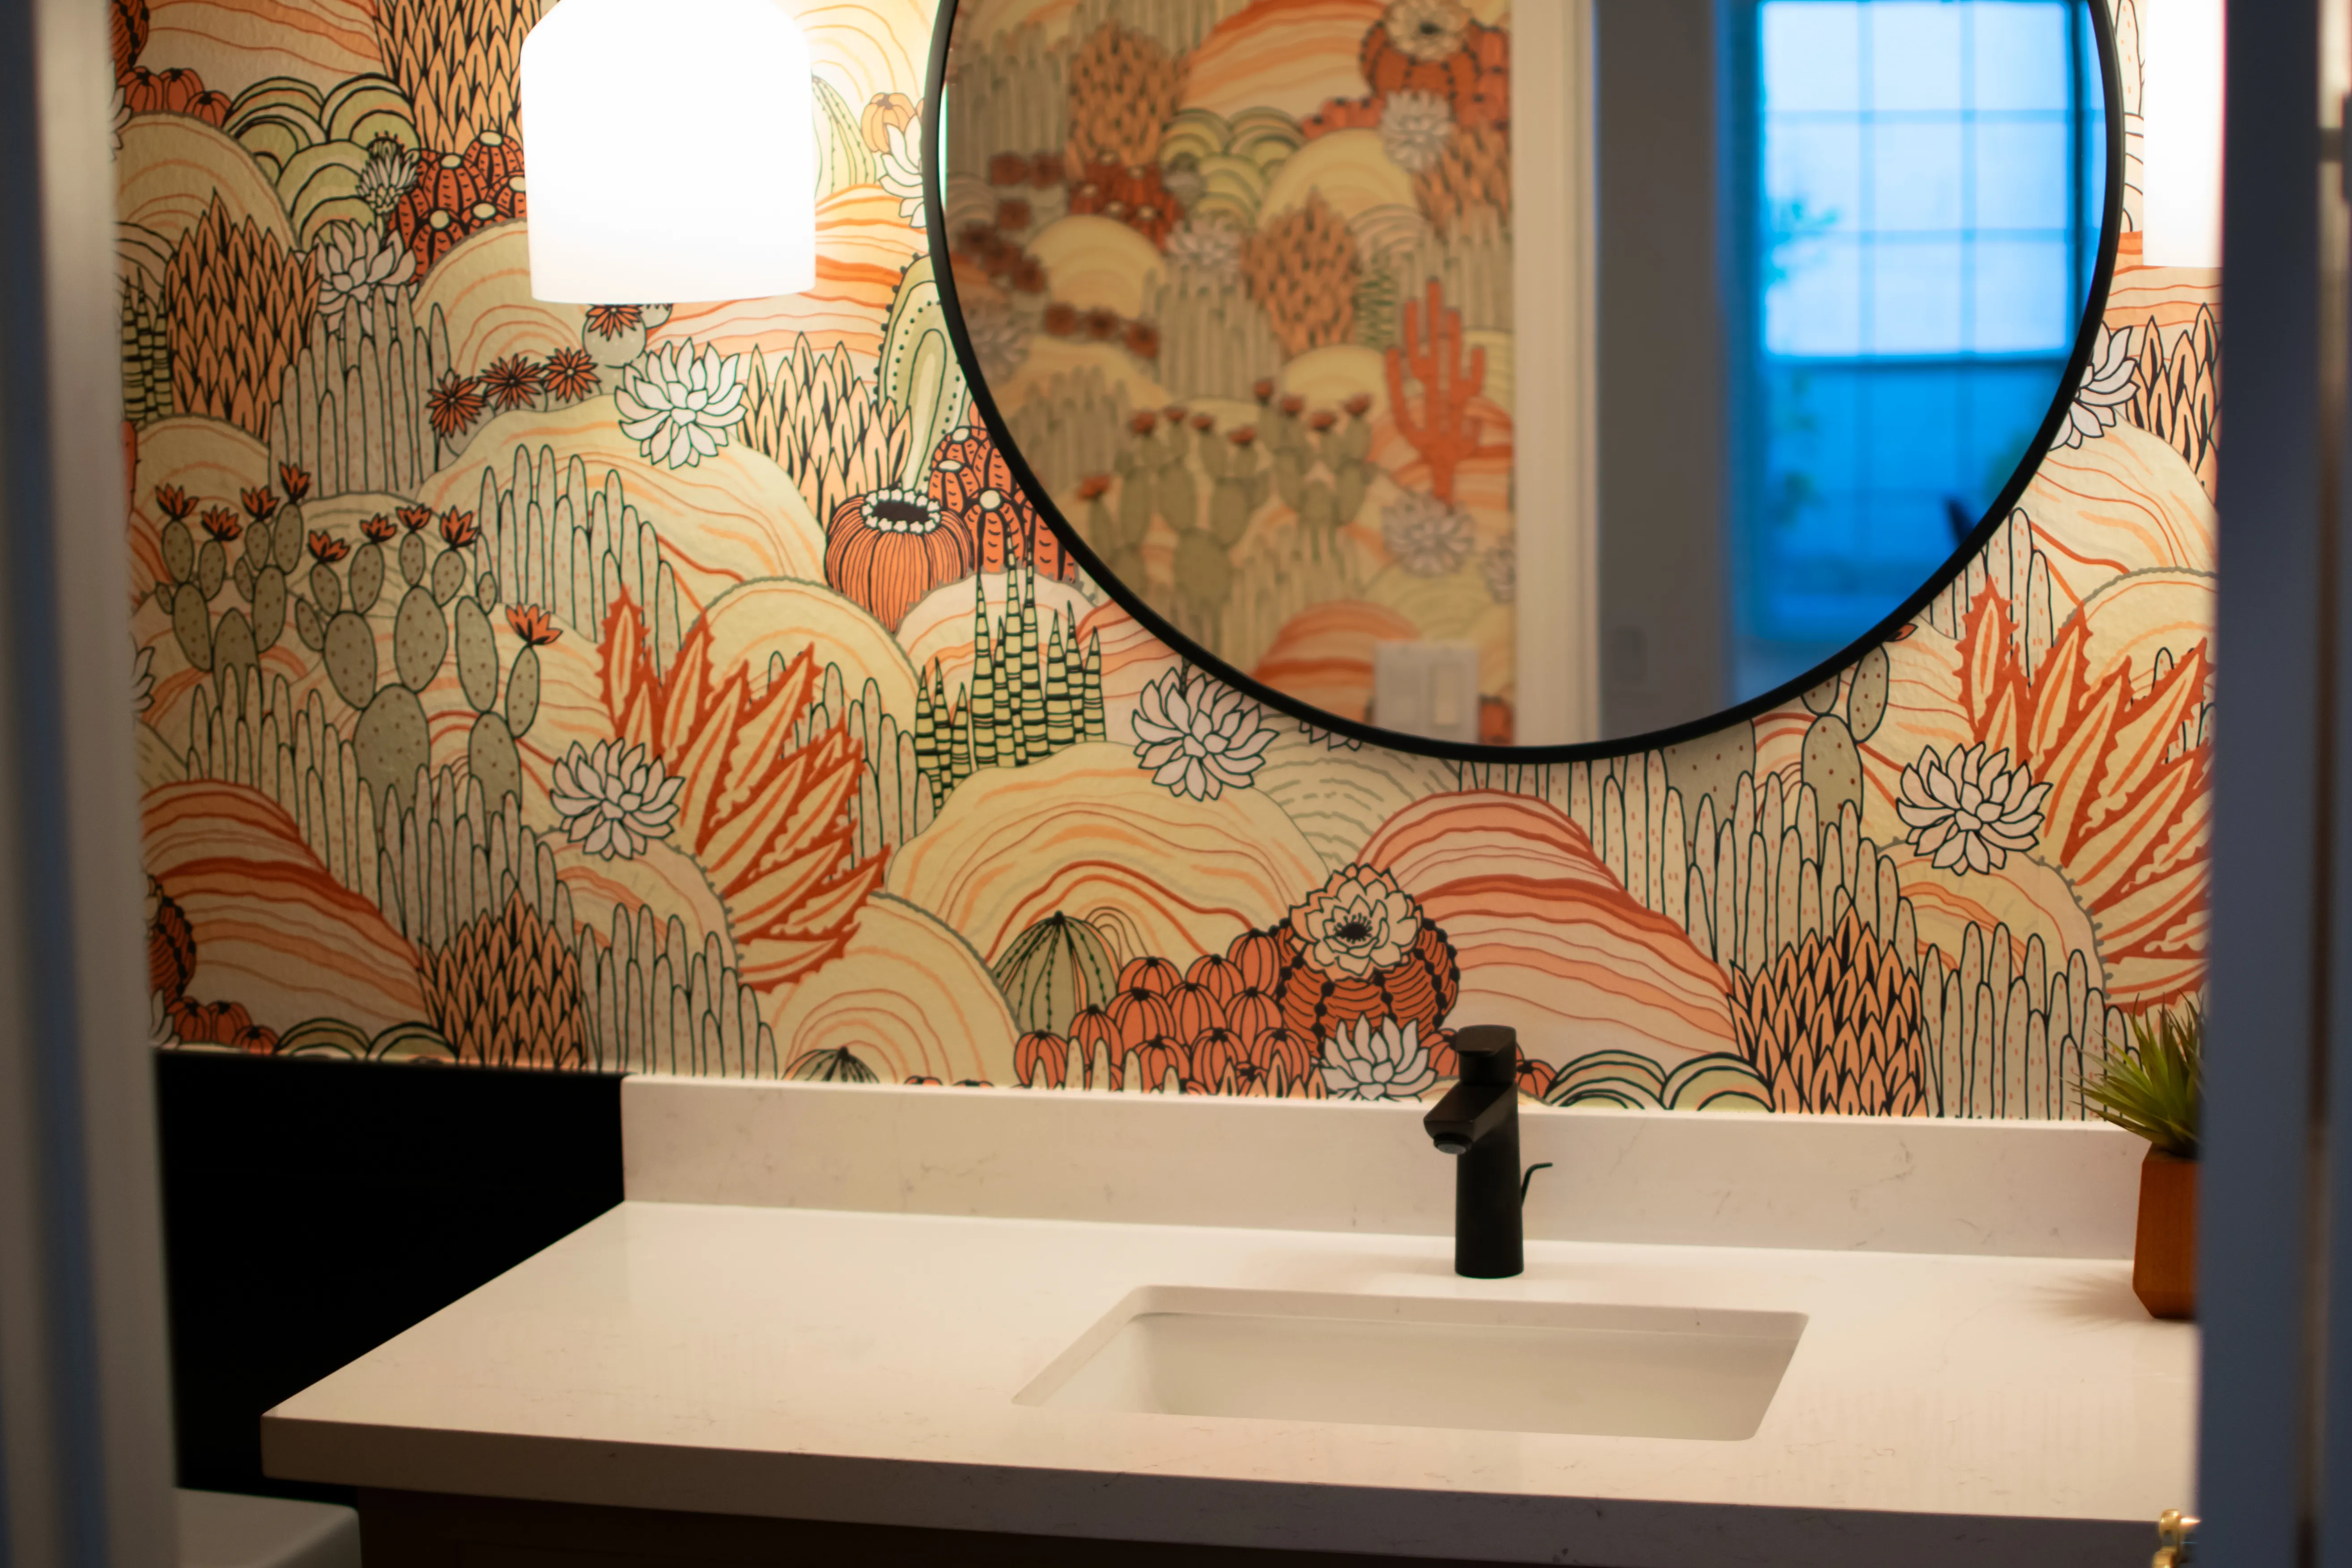 Bathroom water-resistant wallpaper and counter